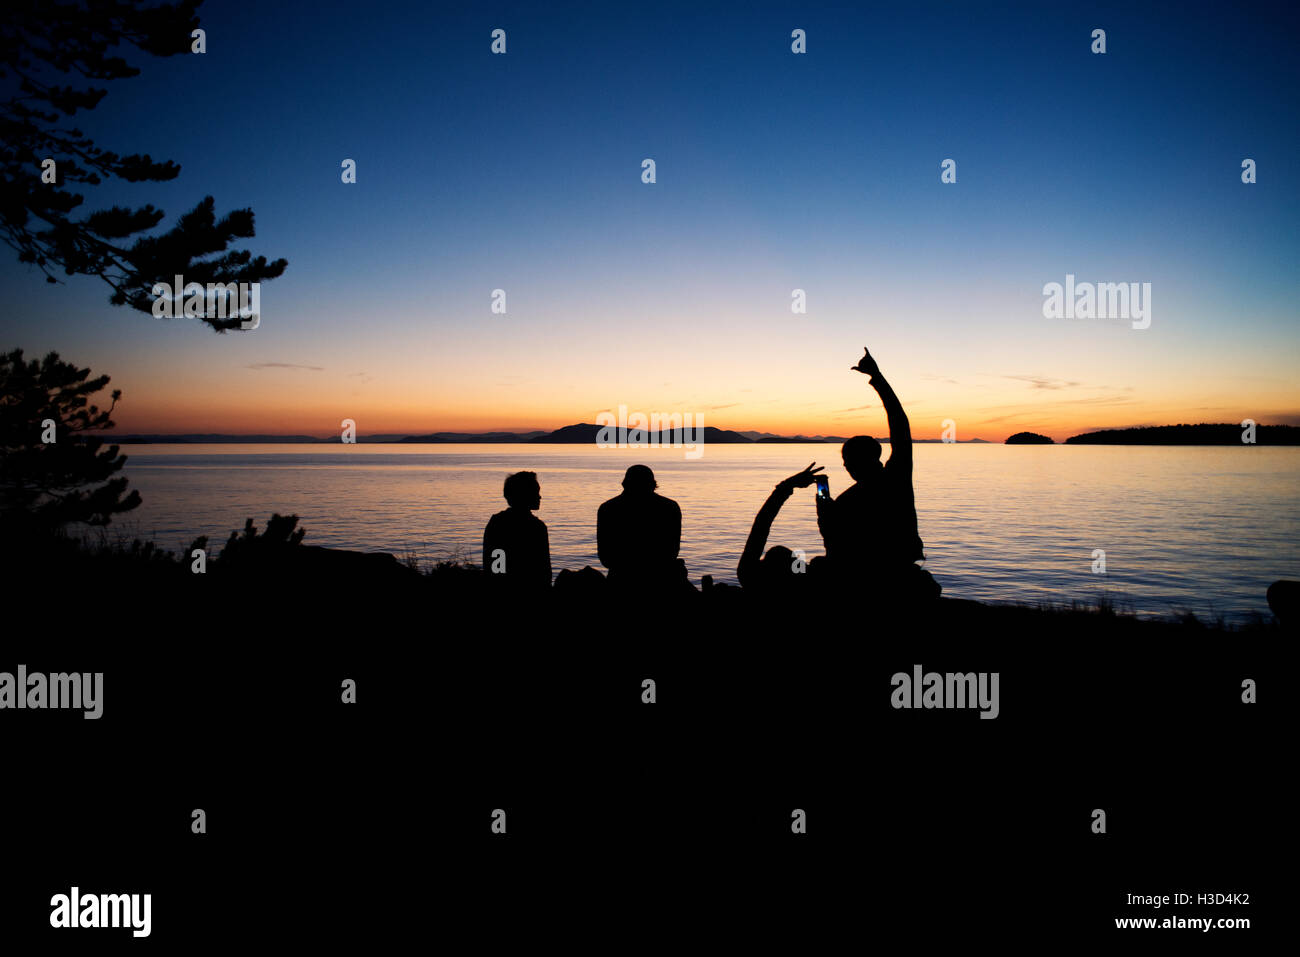 Silhouette men enjoying at Sucia Island against sky during sunset Stock Photo